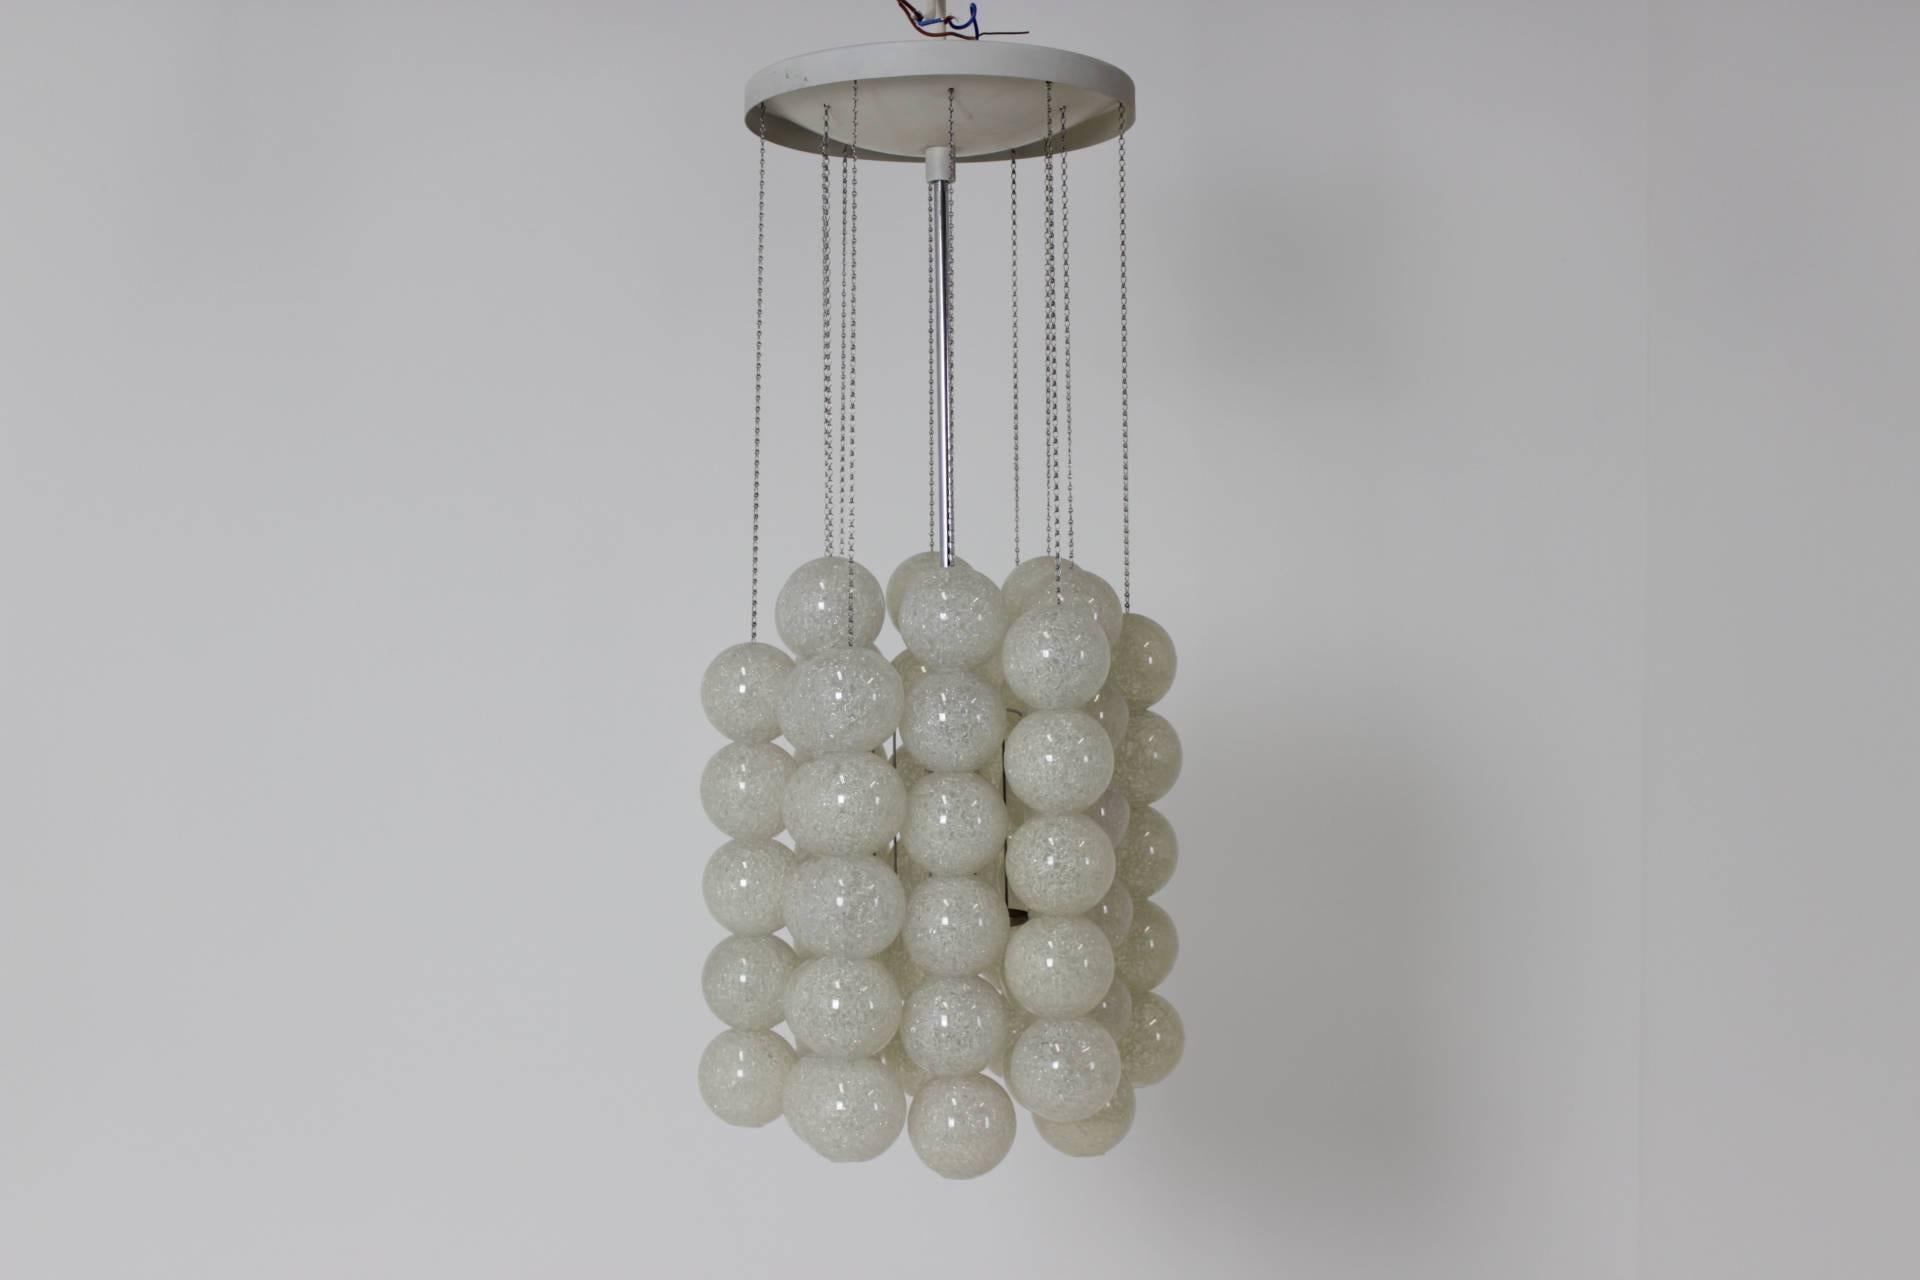 This rare pendant lamp was produced in 1960s in Czechoslovakia by Napako in 1970s.
Every plastic ball has 7.5cm in diameter.
Very good original condition.